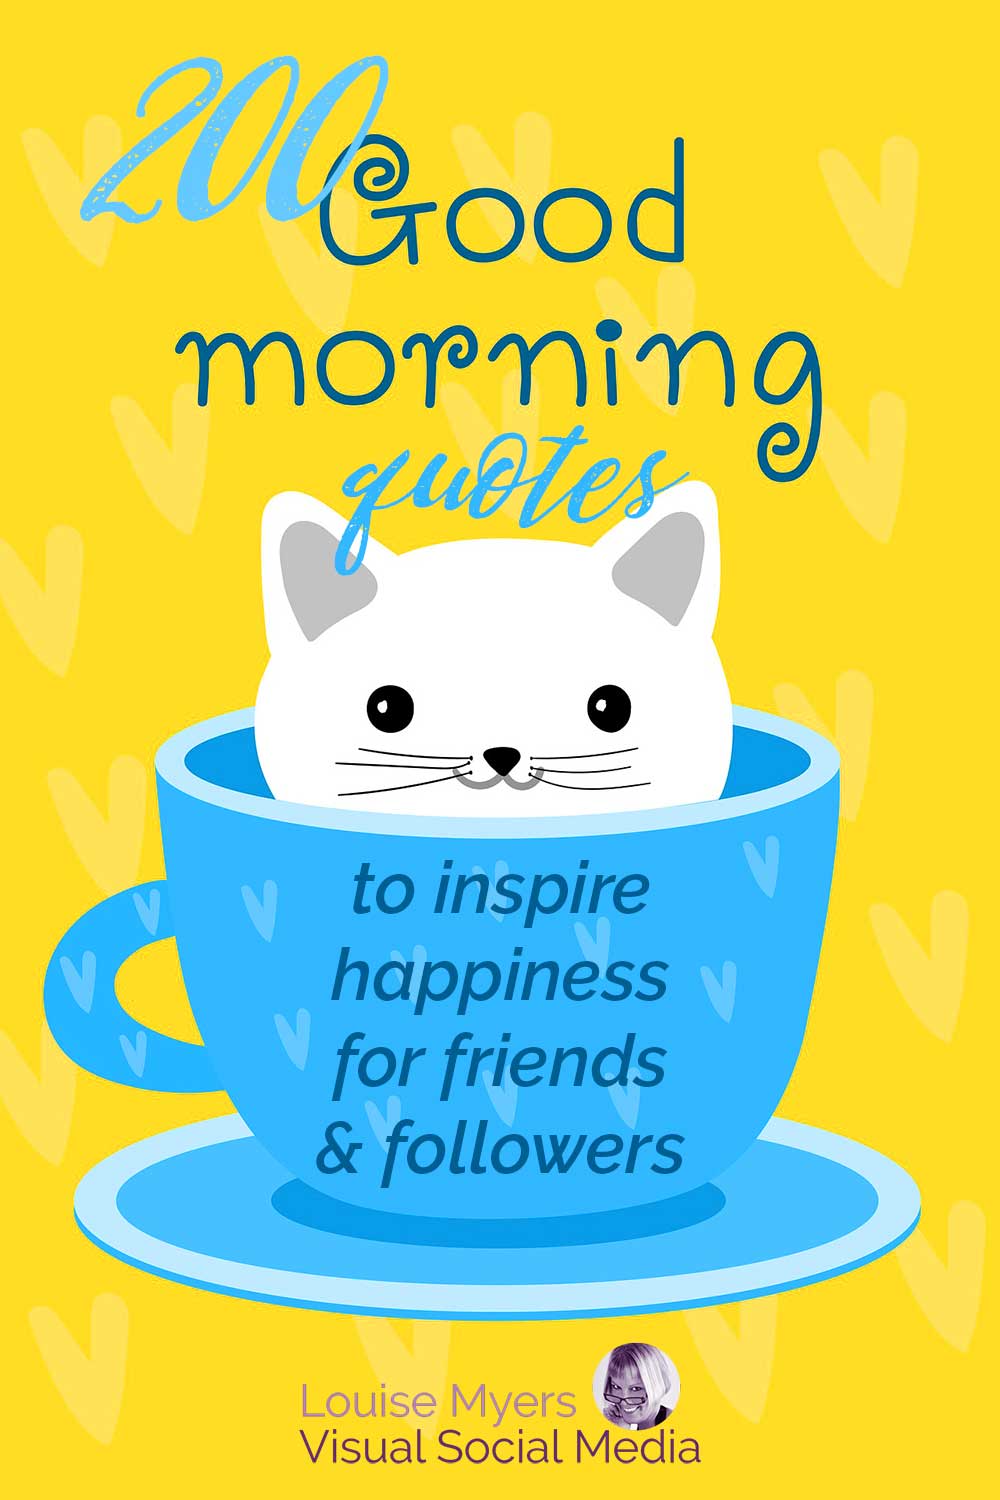 cute white cat in bright blue teacup on yellow background has text saying 200 good morning quotes to inspire happiness for friends and followers.